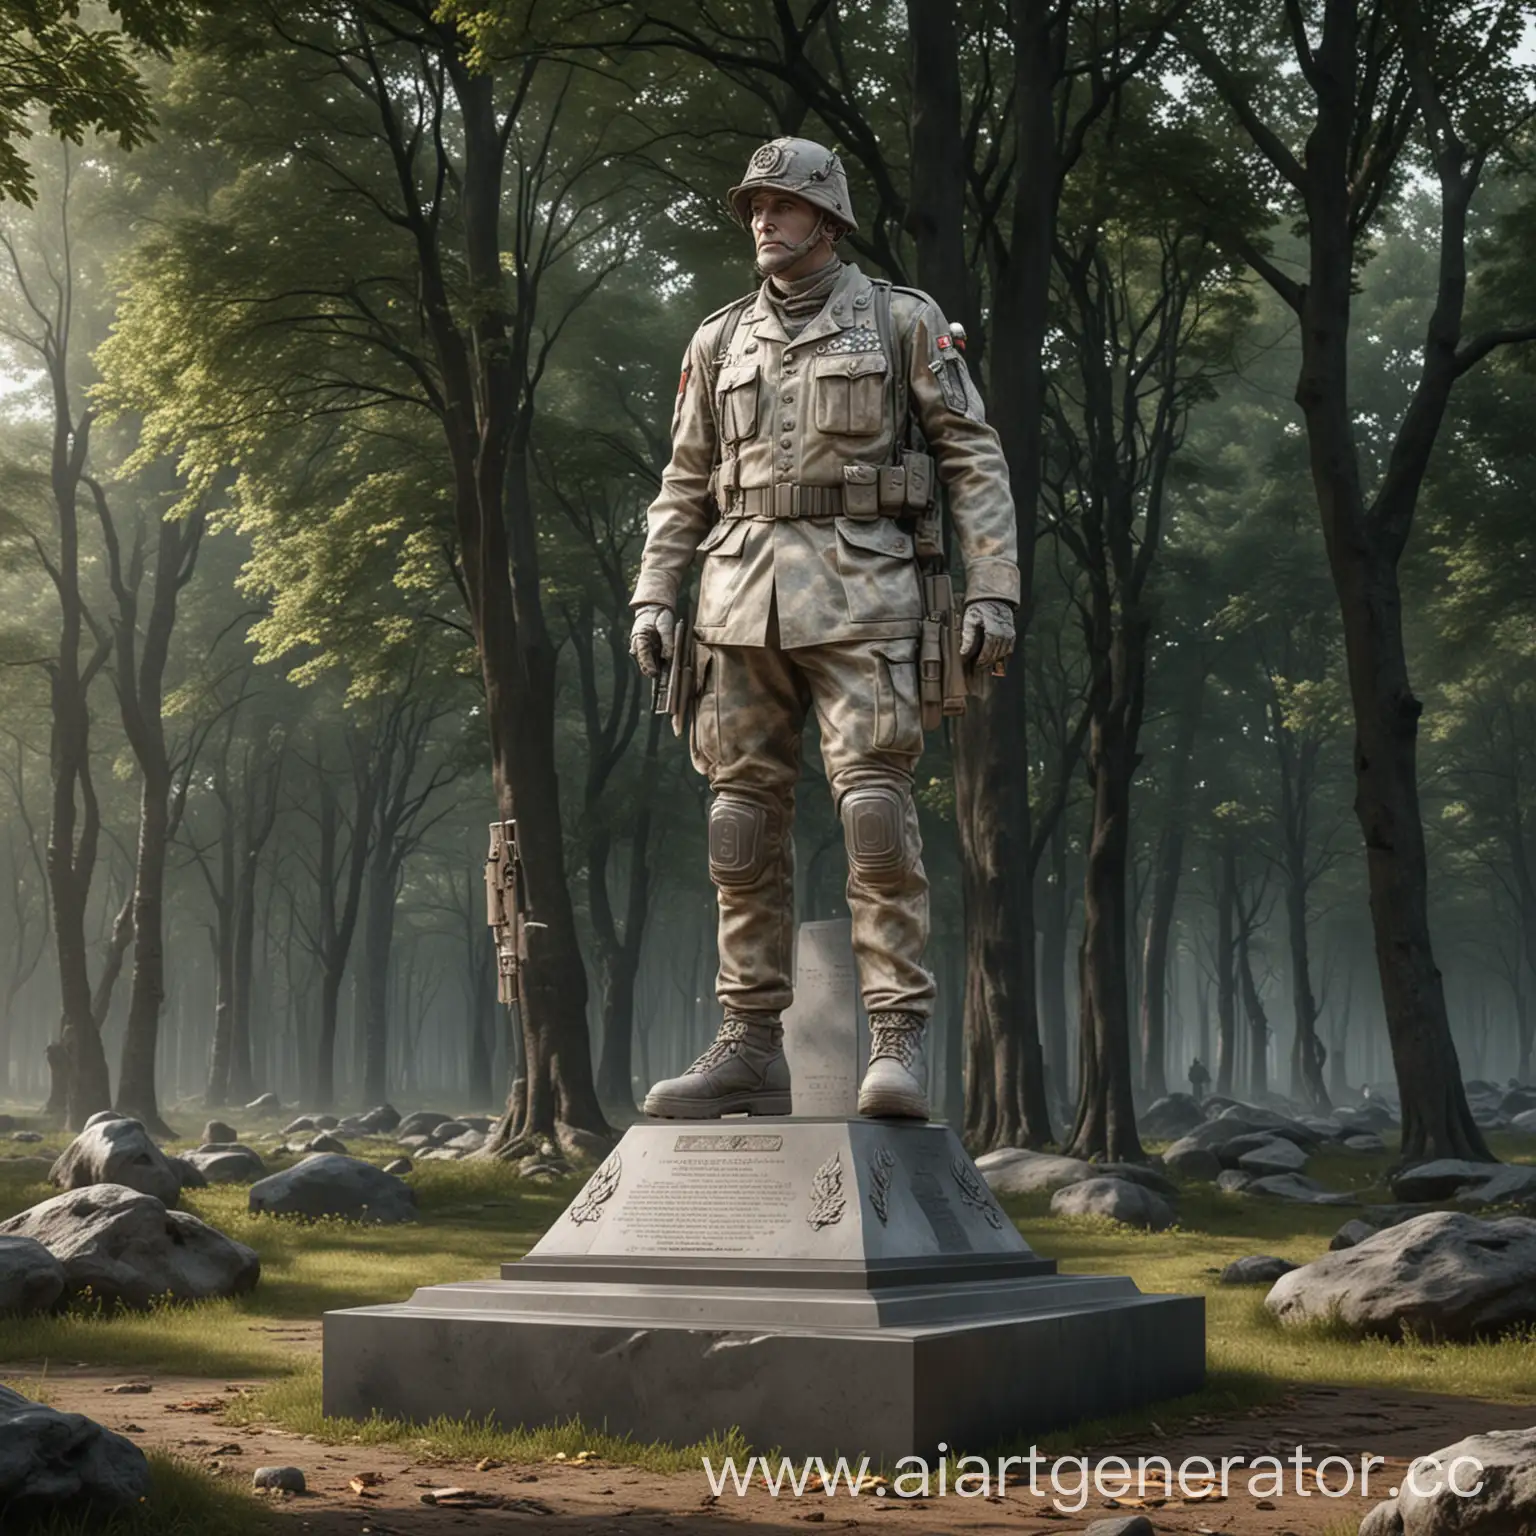 Artificial-Intelligence-Assisted-Monument-Design-for-Military-Veterans